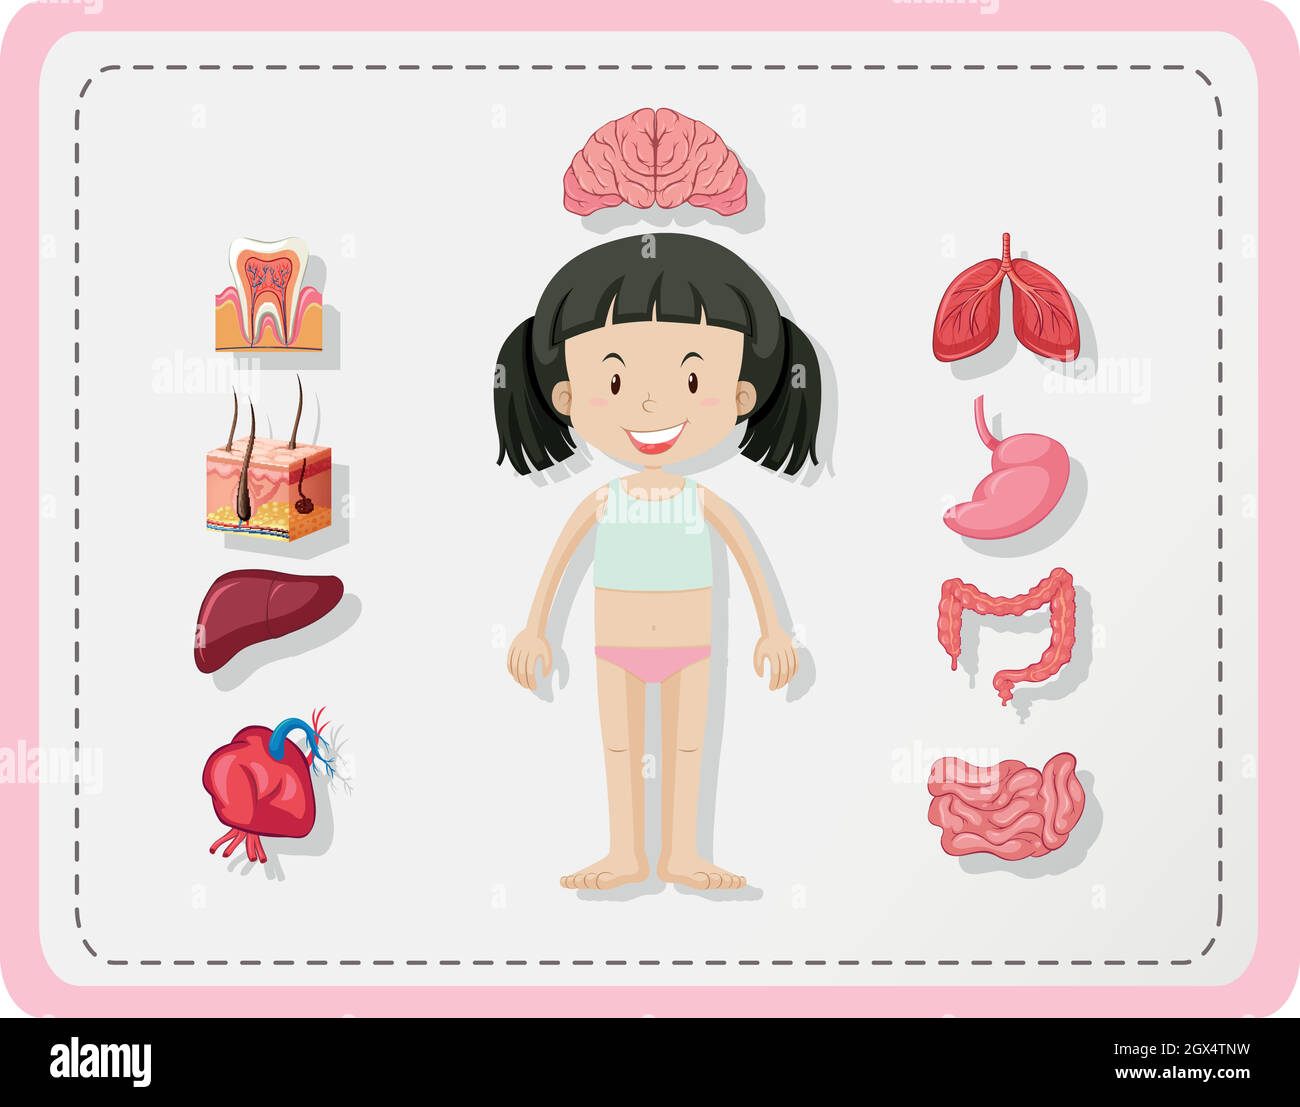 Diagram showing human parts of girl Stock Vector